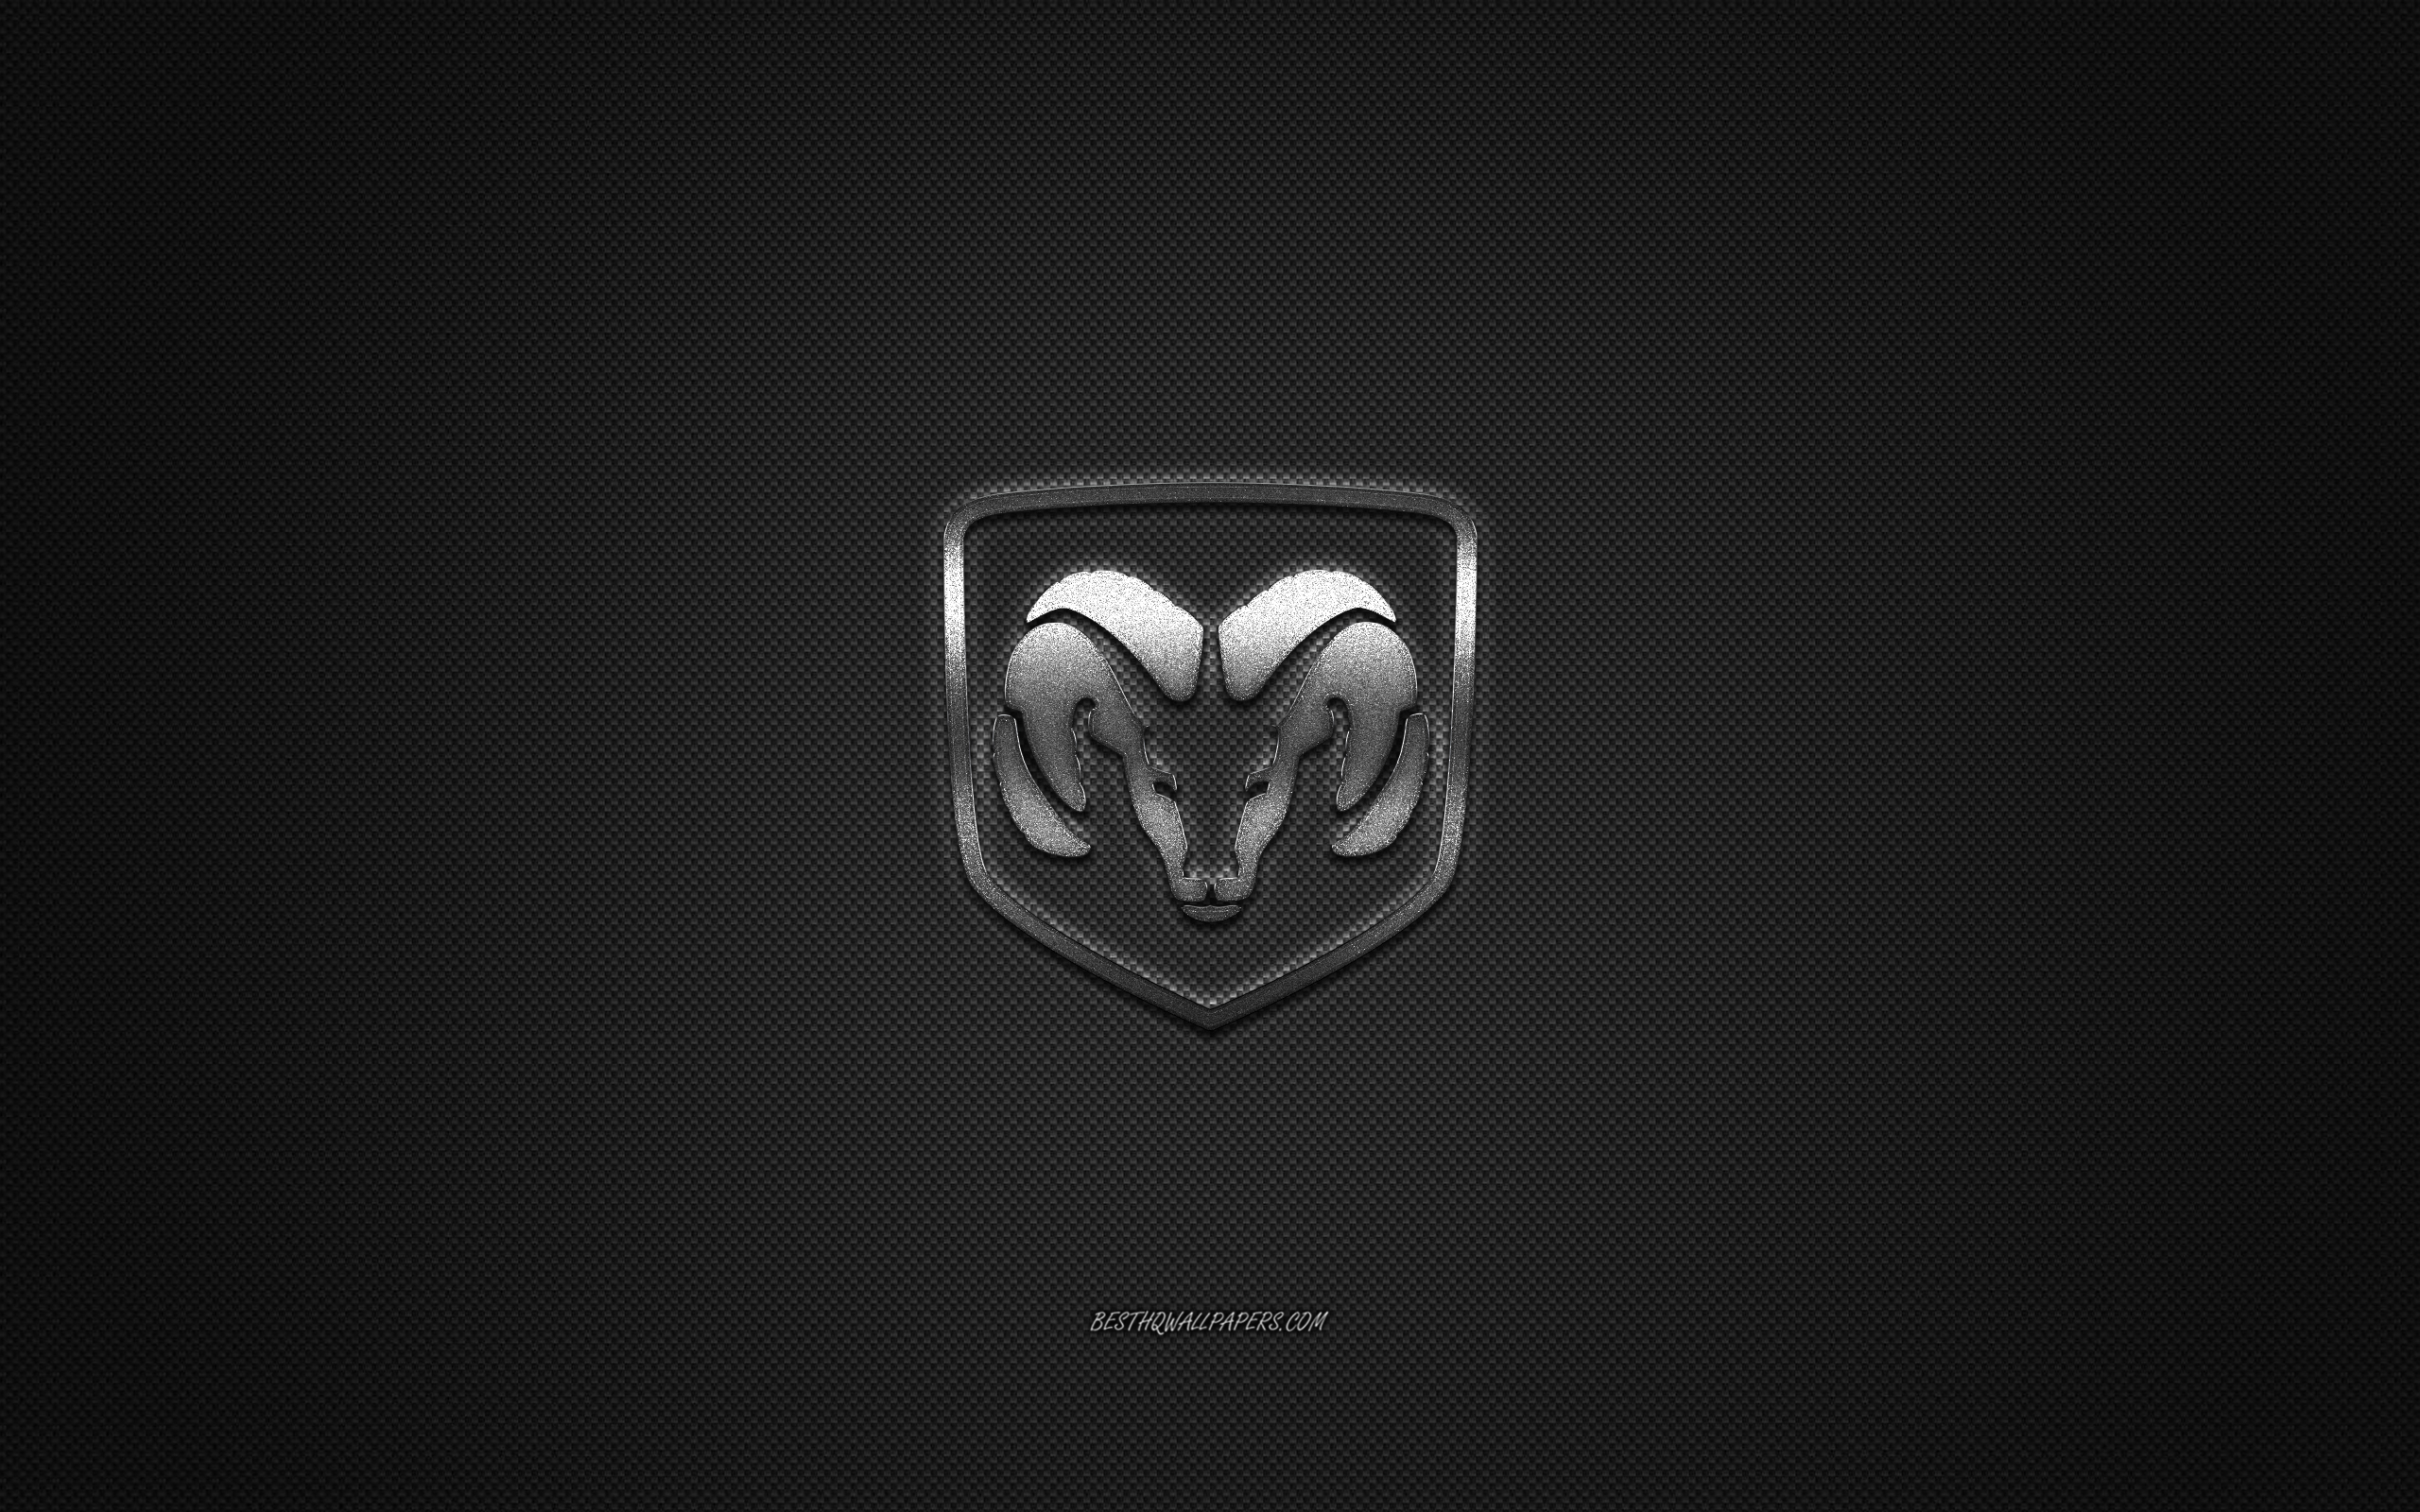 Download wallpaper 1440x2560 dodge charger front bumper logo qhd samsung  galaxy s6 s7 edge note lg g4 hd background